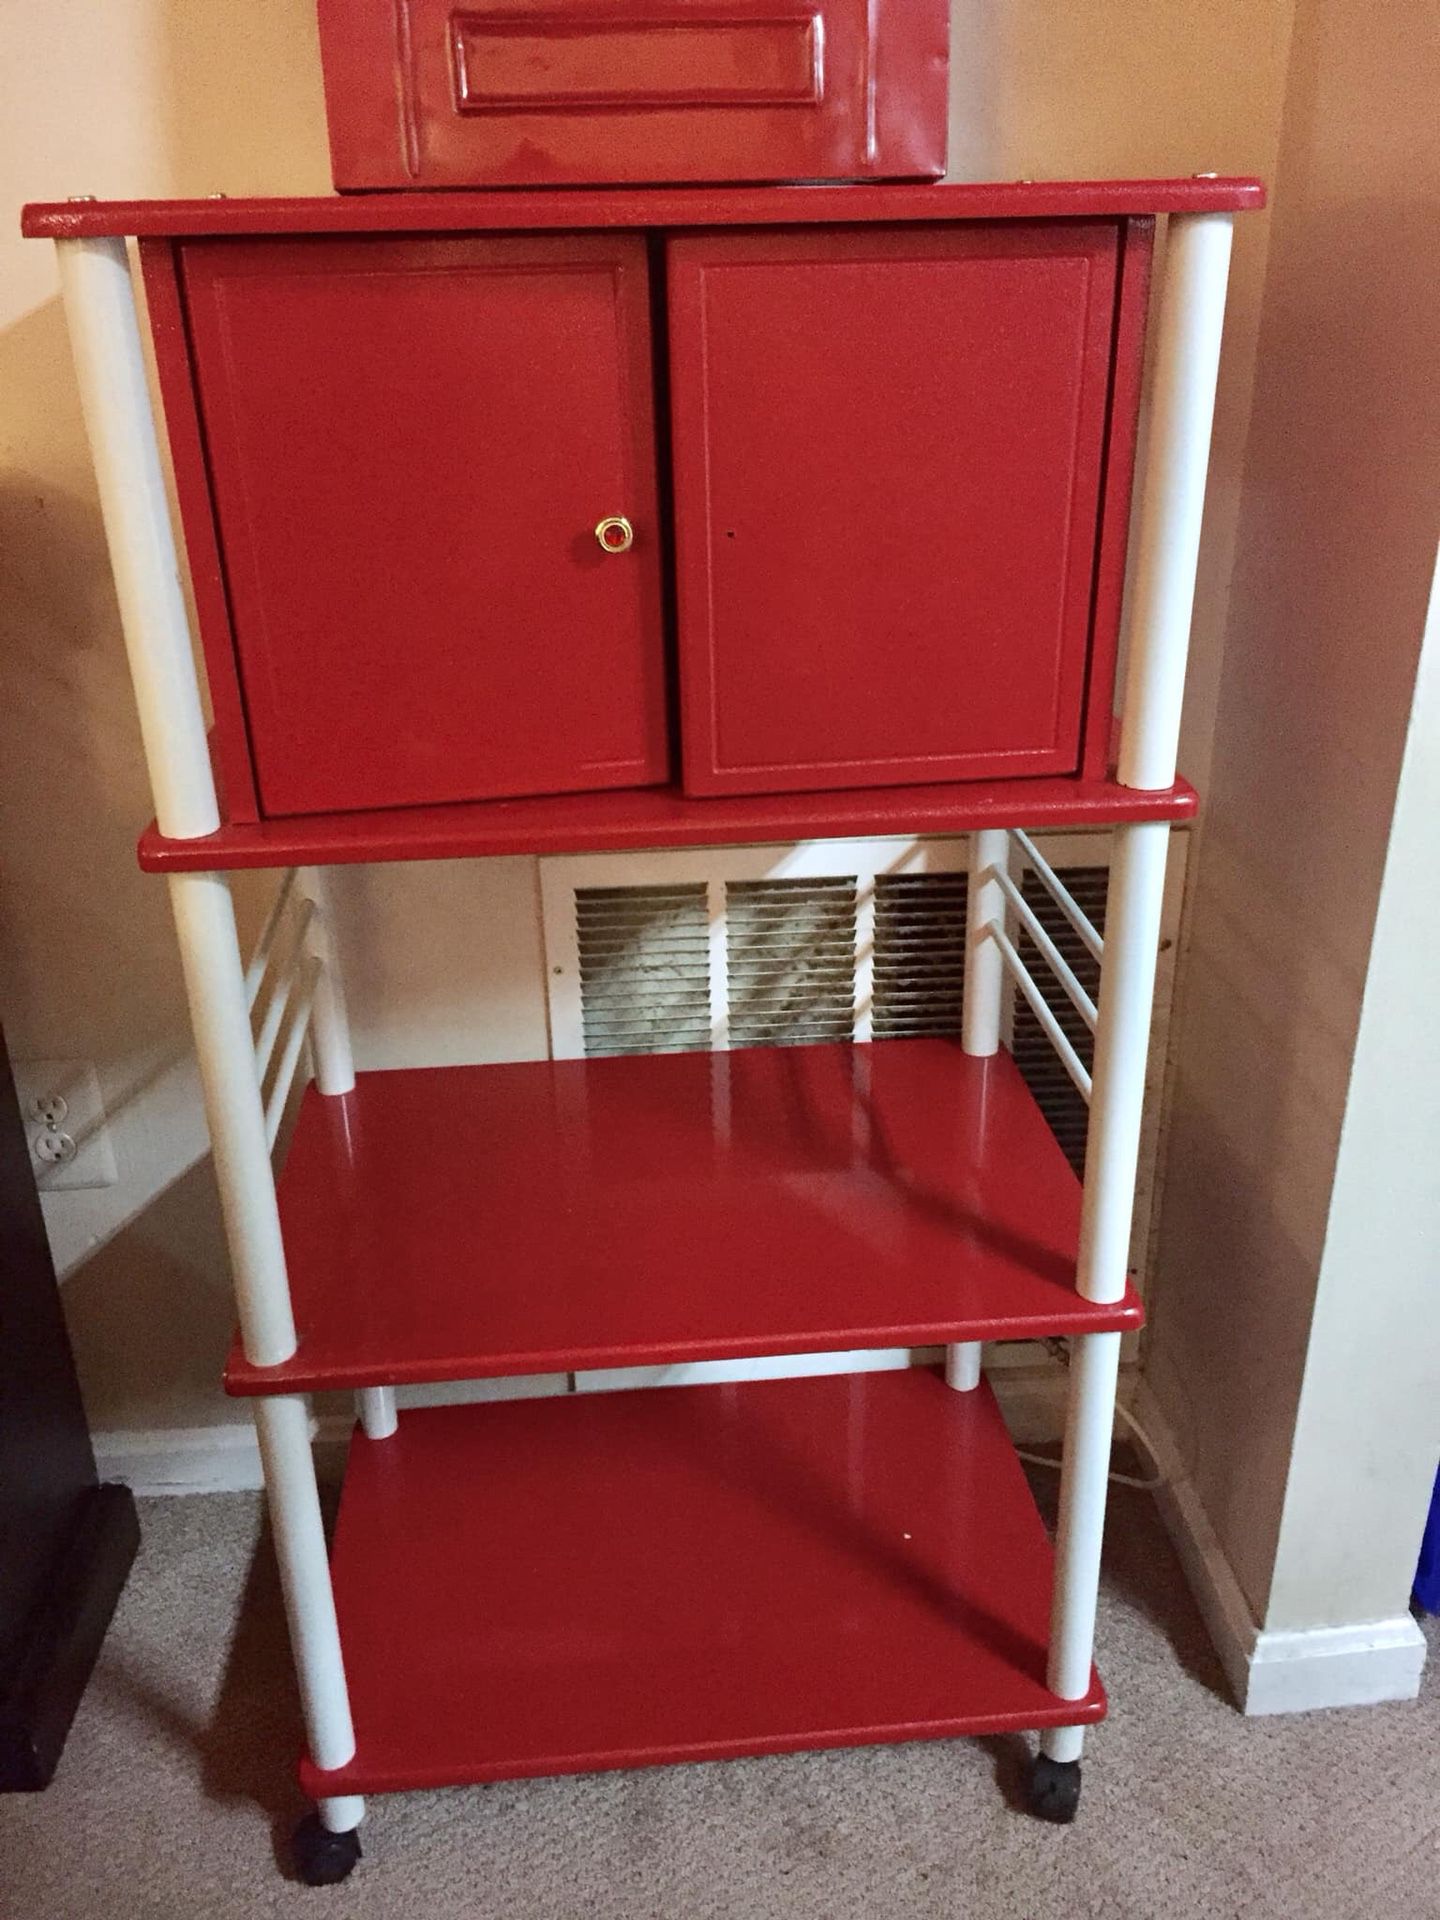 Brand new condition never used Bakers rack and matching red barstools